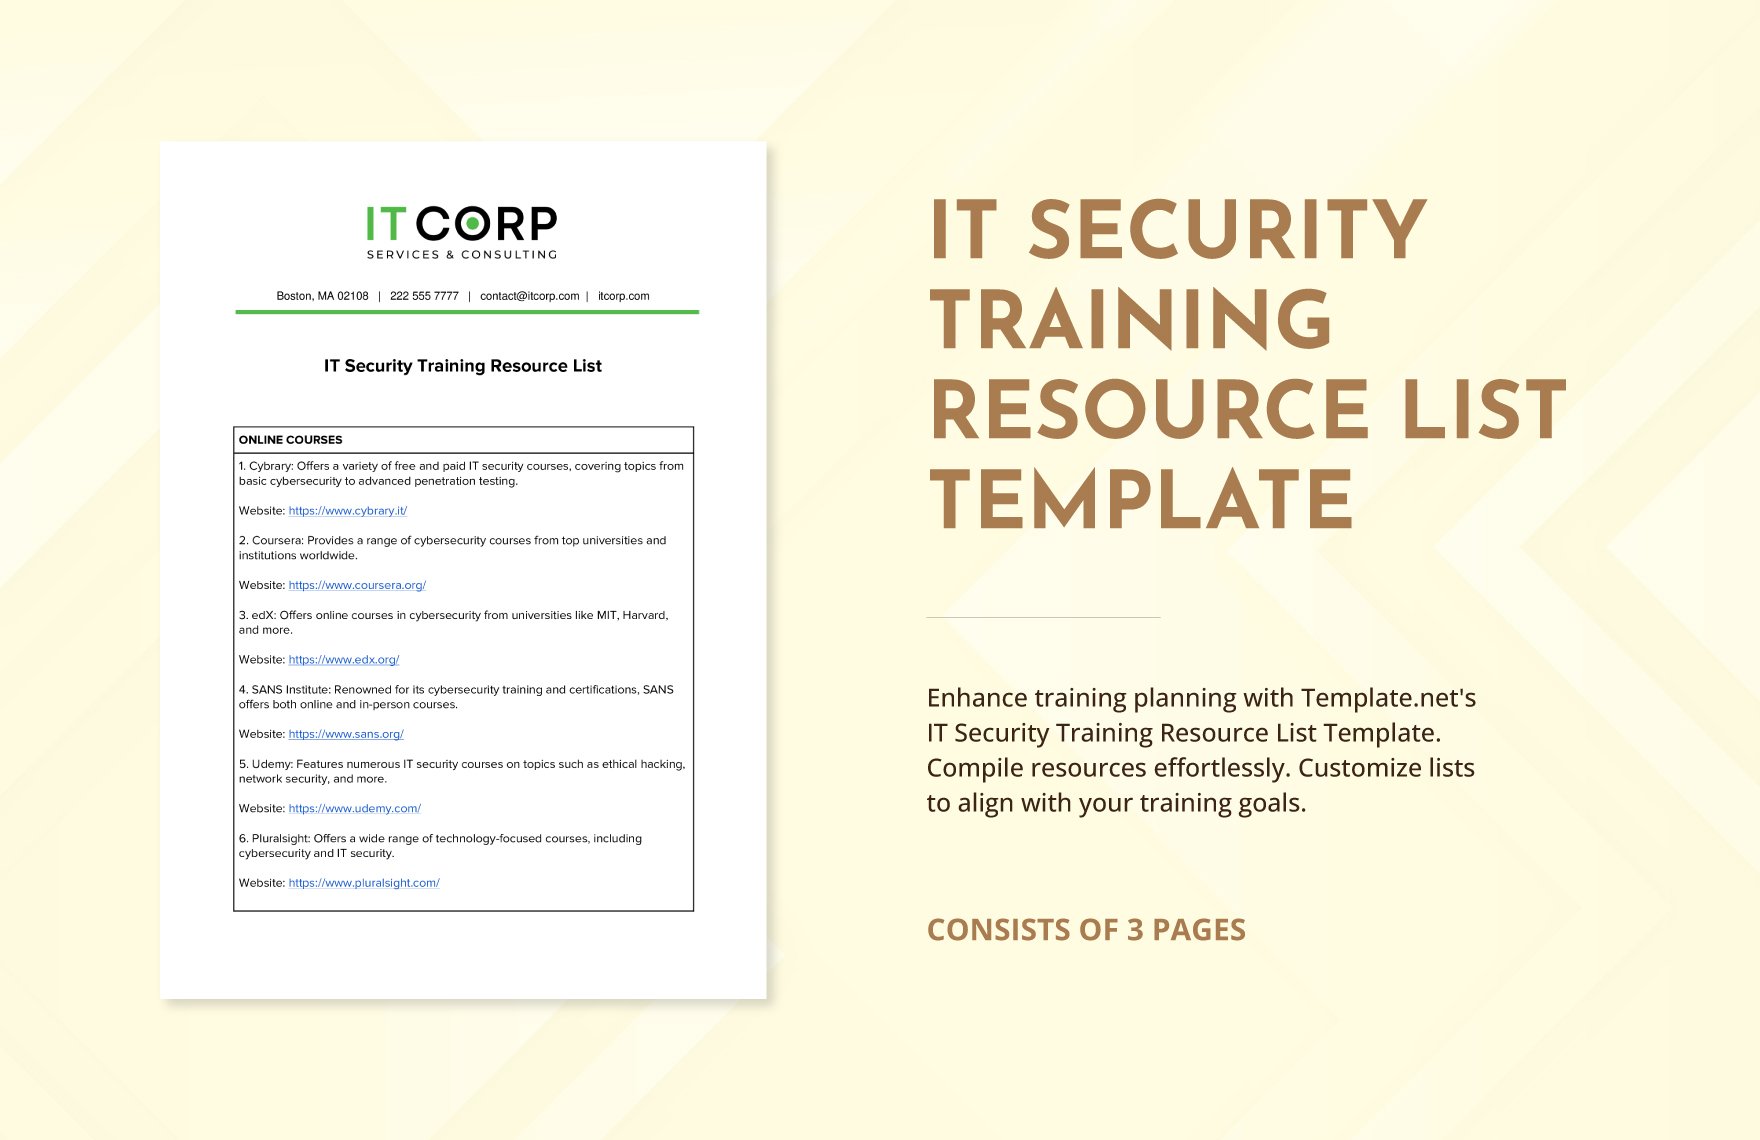 IT Security Training Resource List Template